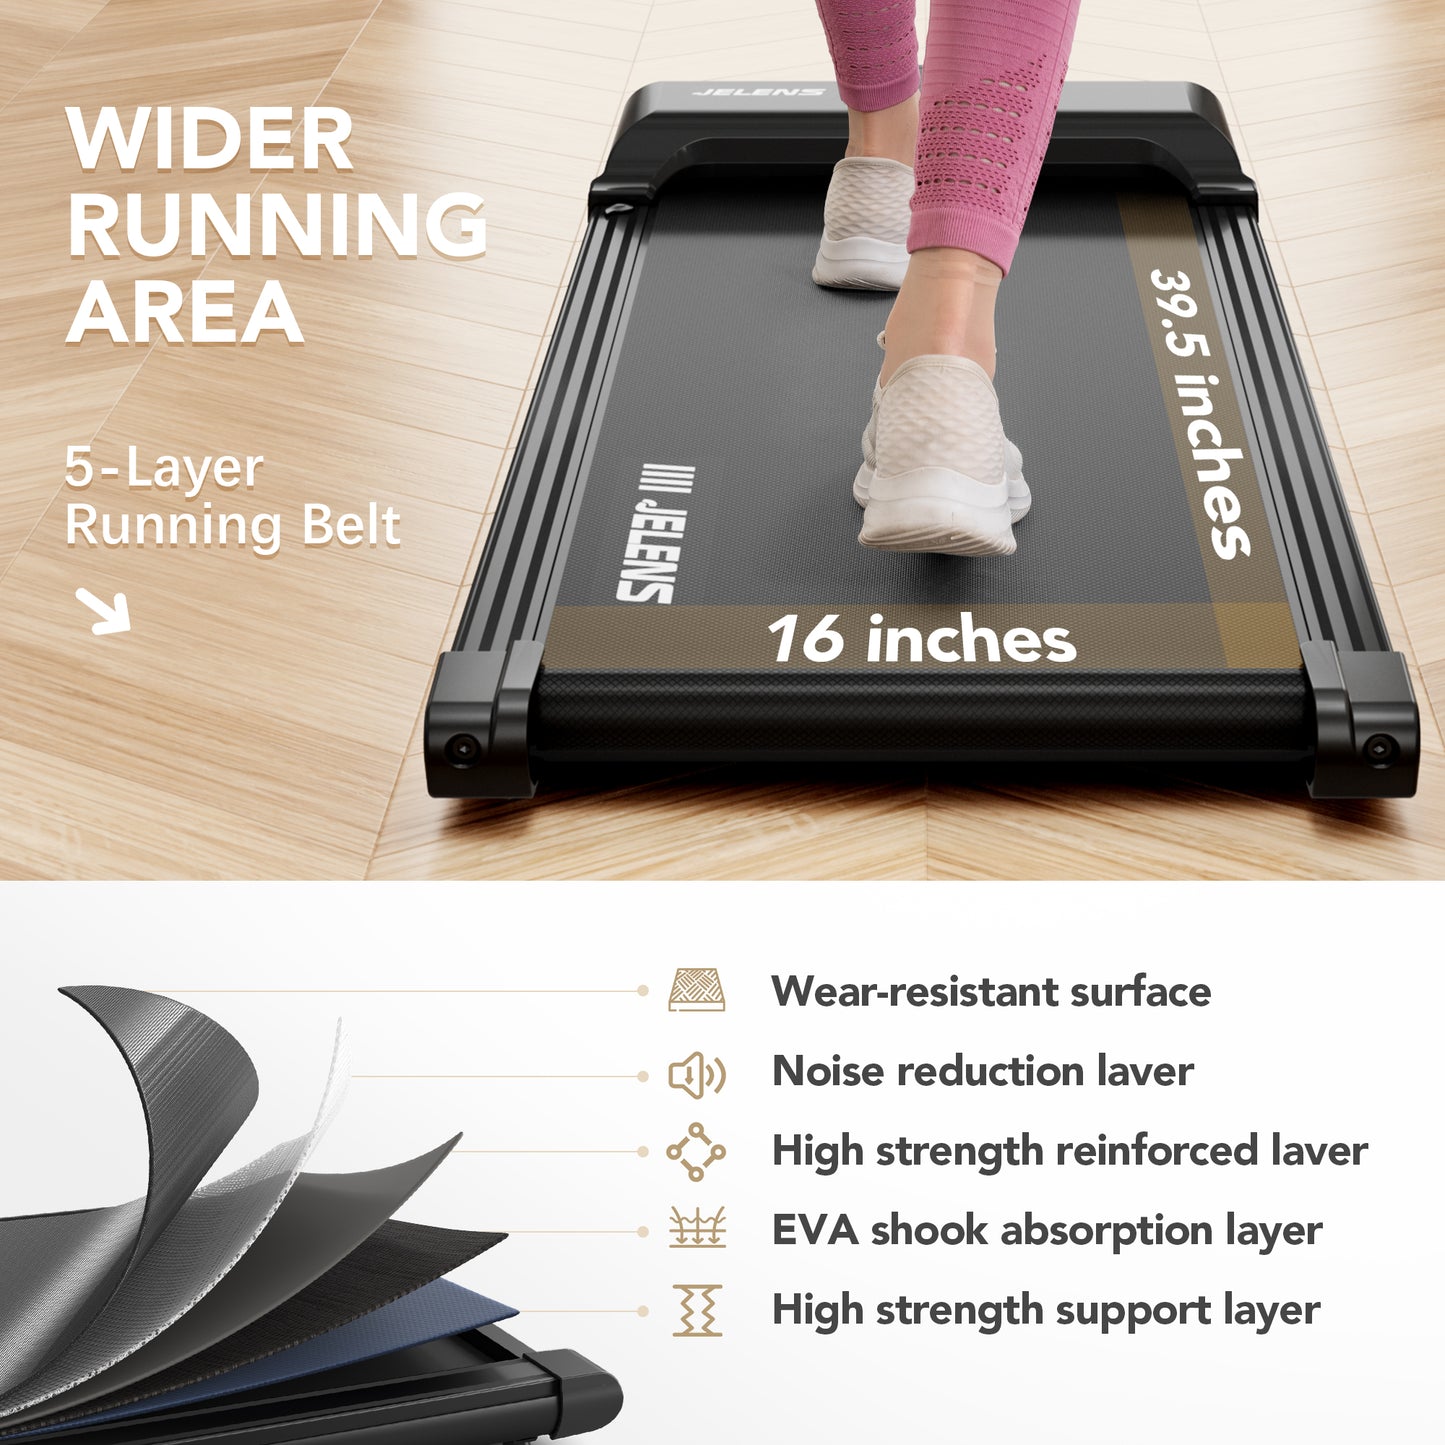 JELENS Walking Pad, Under Desk Treadmill for Home Office, 2.5HP Portable Treadmill with Remote Control, Walking Pad in LED Display, 2 in 1 Treadmill for Walking and Jogging